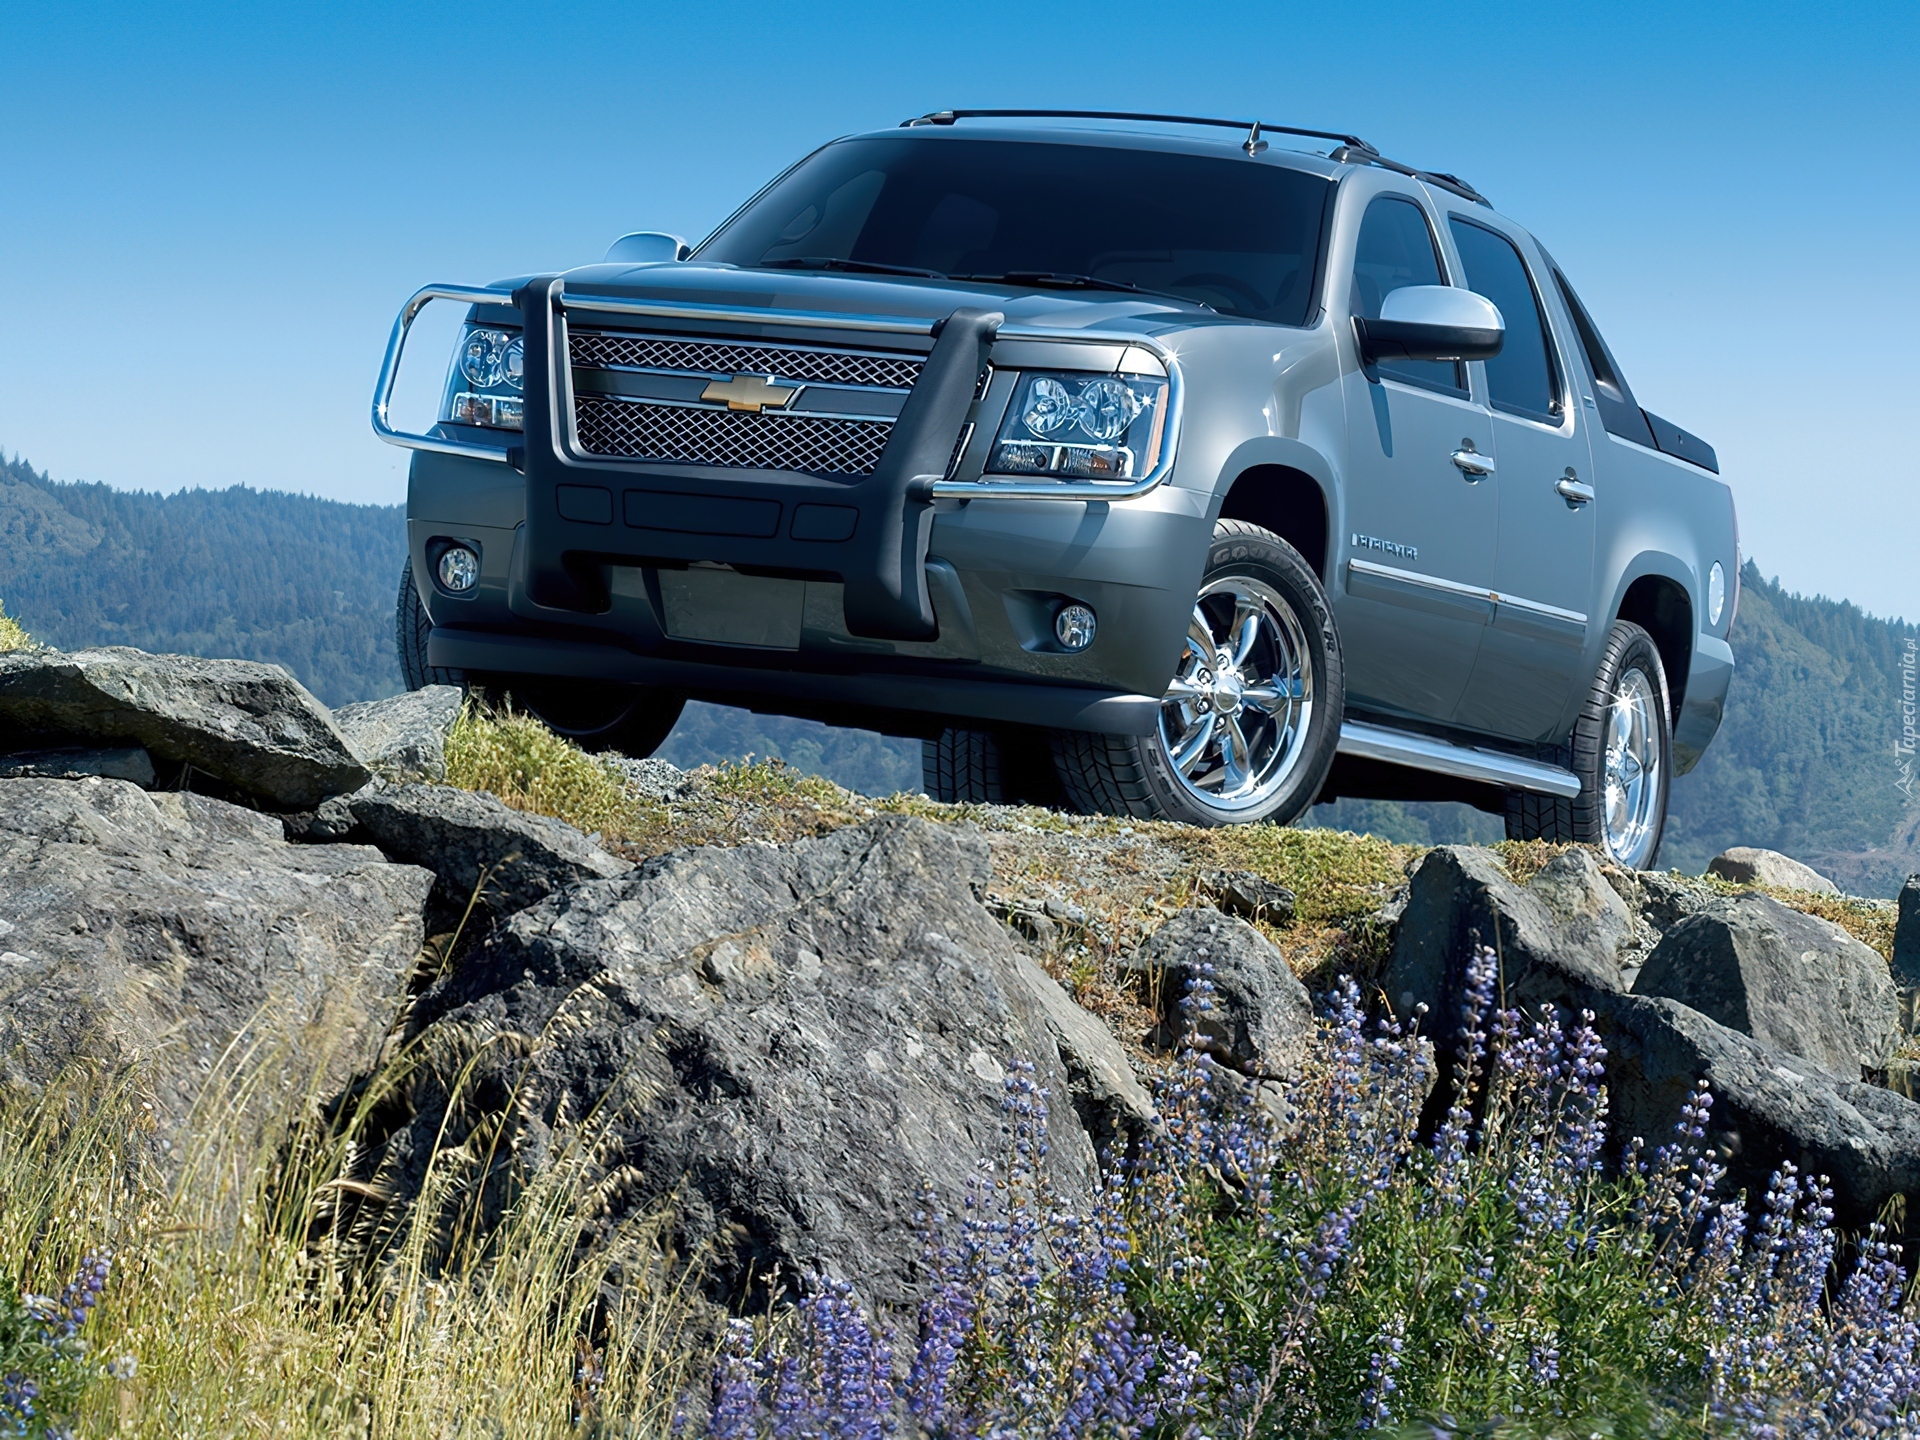 Chevrolet Avalanche, Offroad